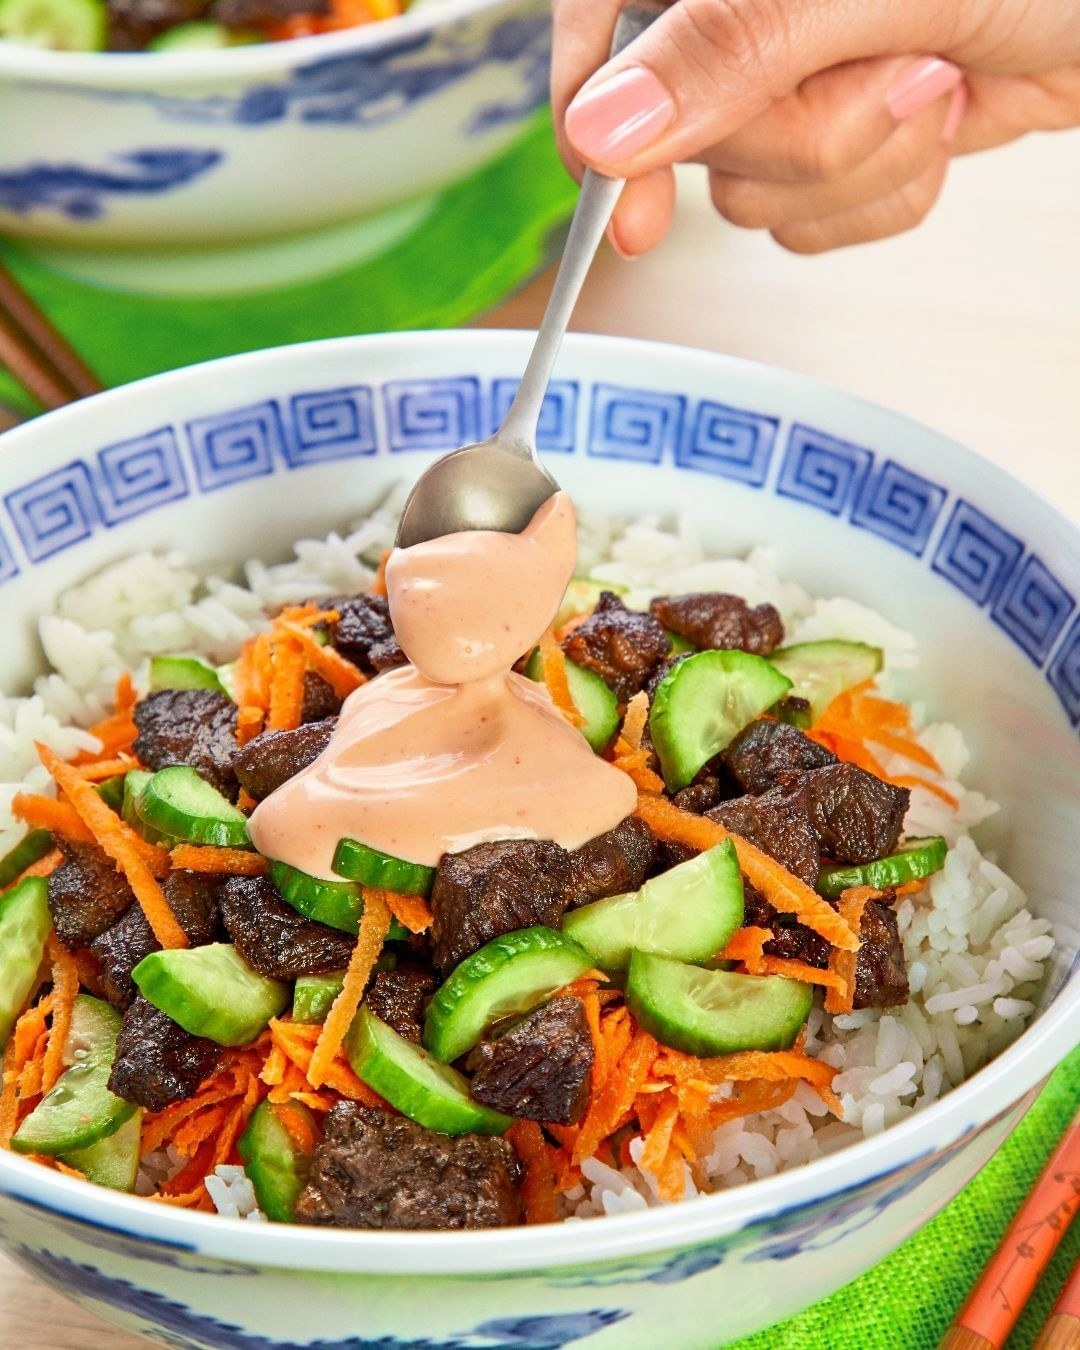 A hand drizzling sauce with a spoon onto a rice bowl topped with meat and vegetables